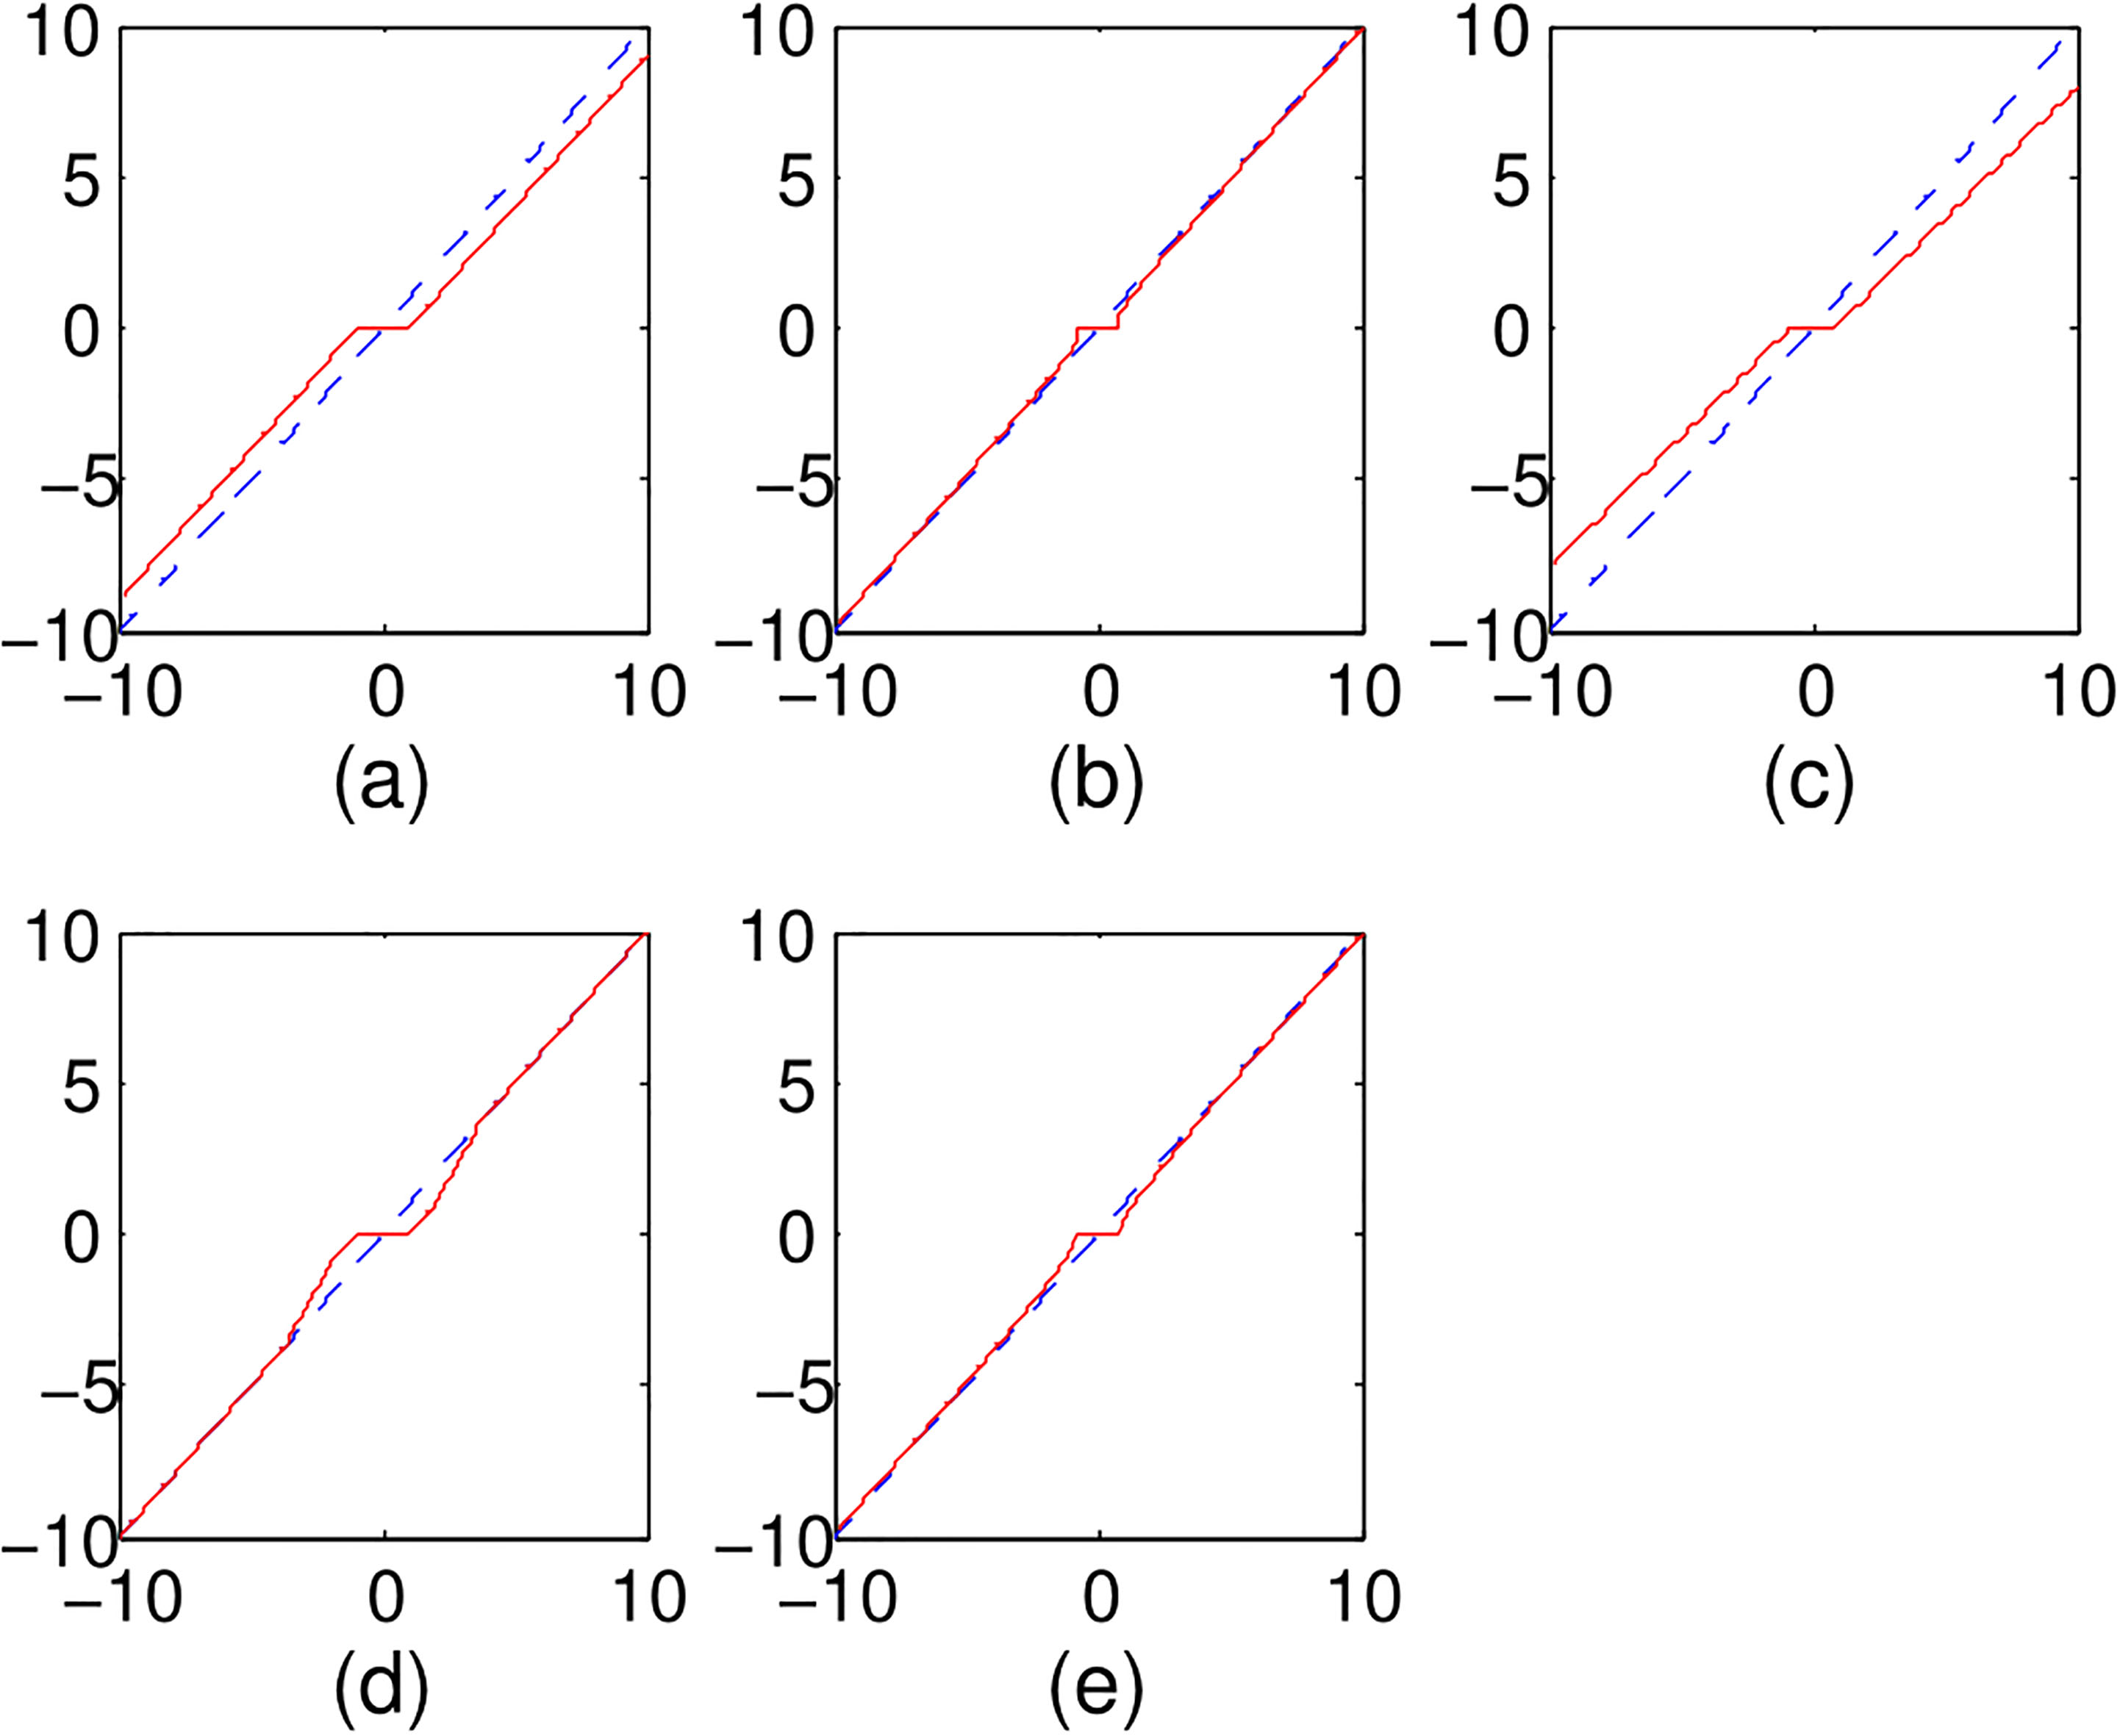 Various penalized function for orthonormal design: (a) Lasso, (b) ℓ1/2, (c) Elastic net, (d) SCAD, (e) Log-sum.